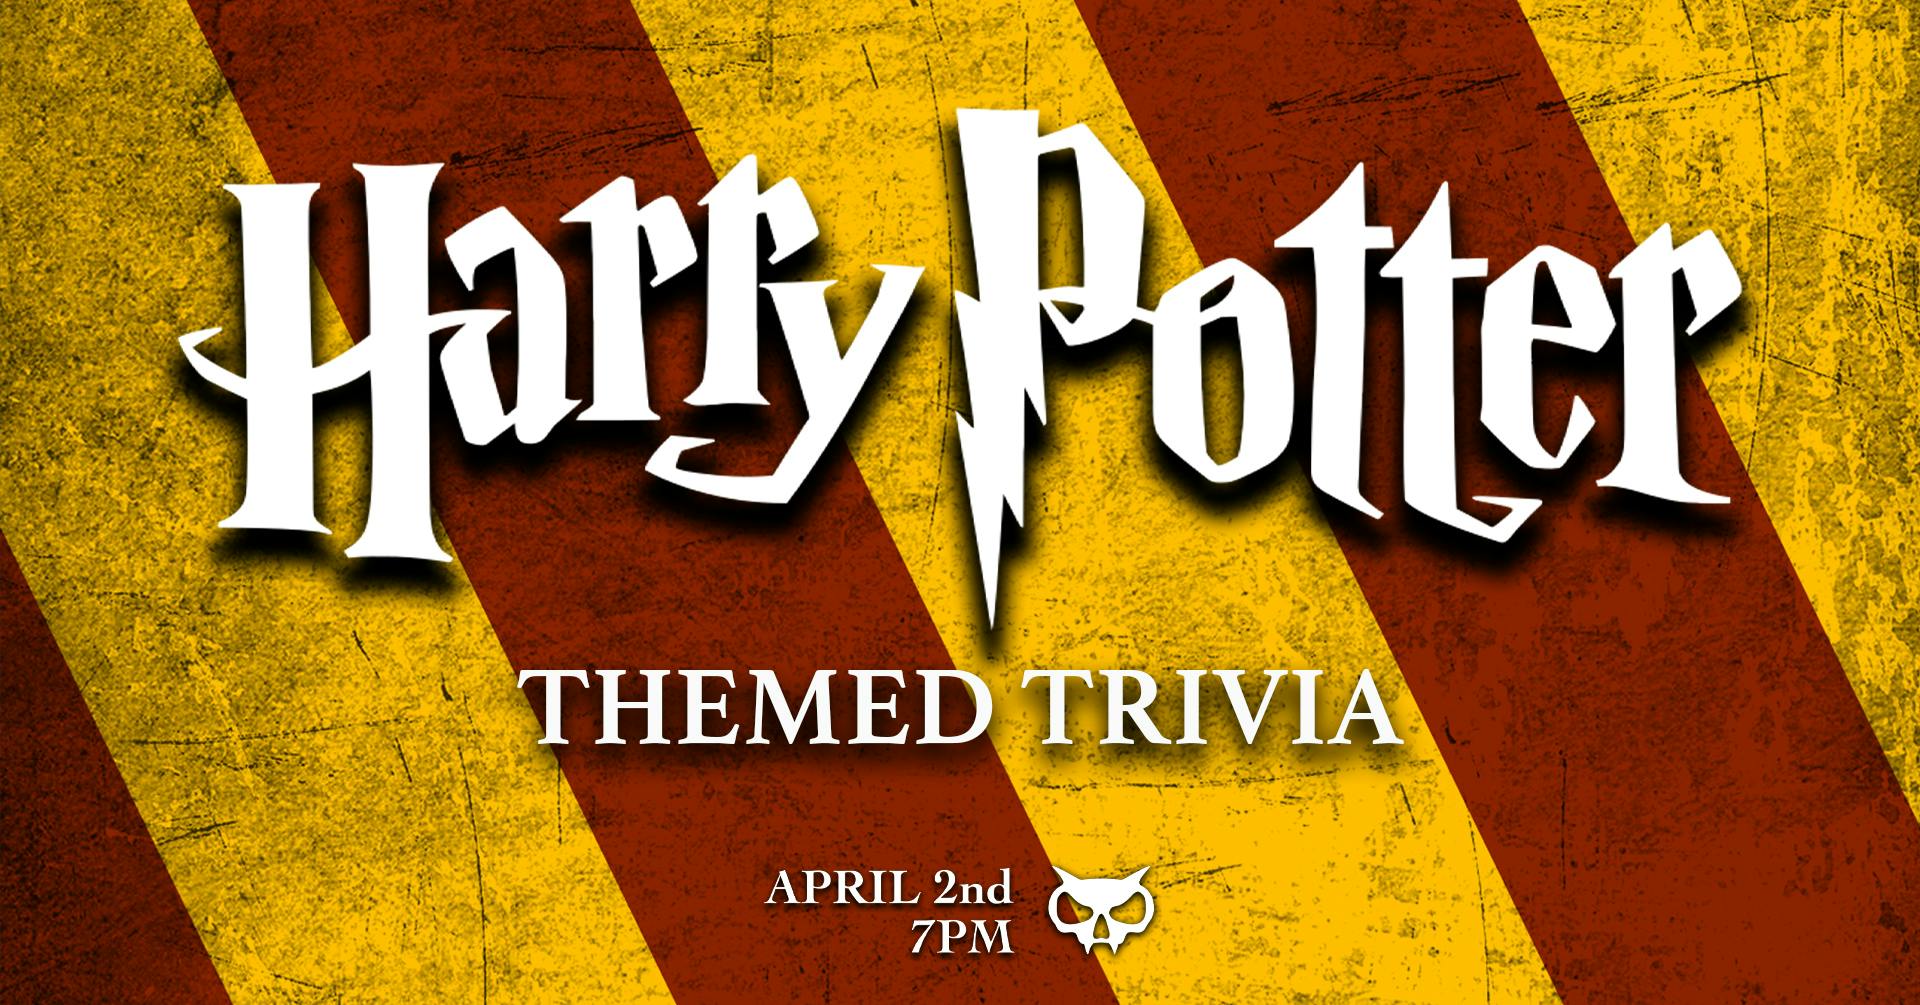 Harry Potter Trivia. Tuesday, April 2nd at 7PM downtown. 